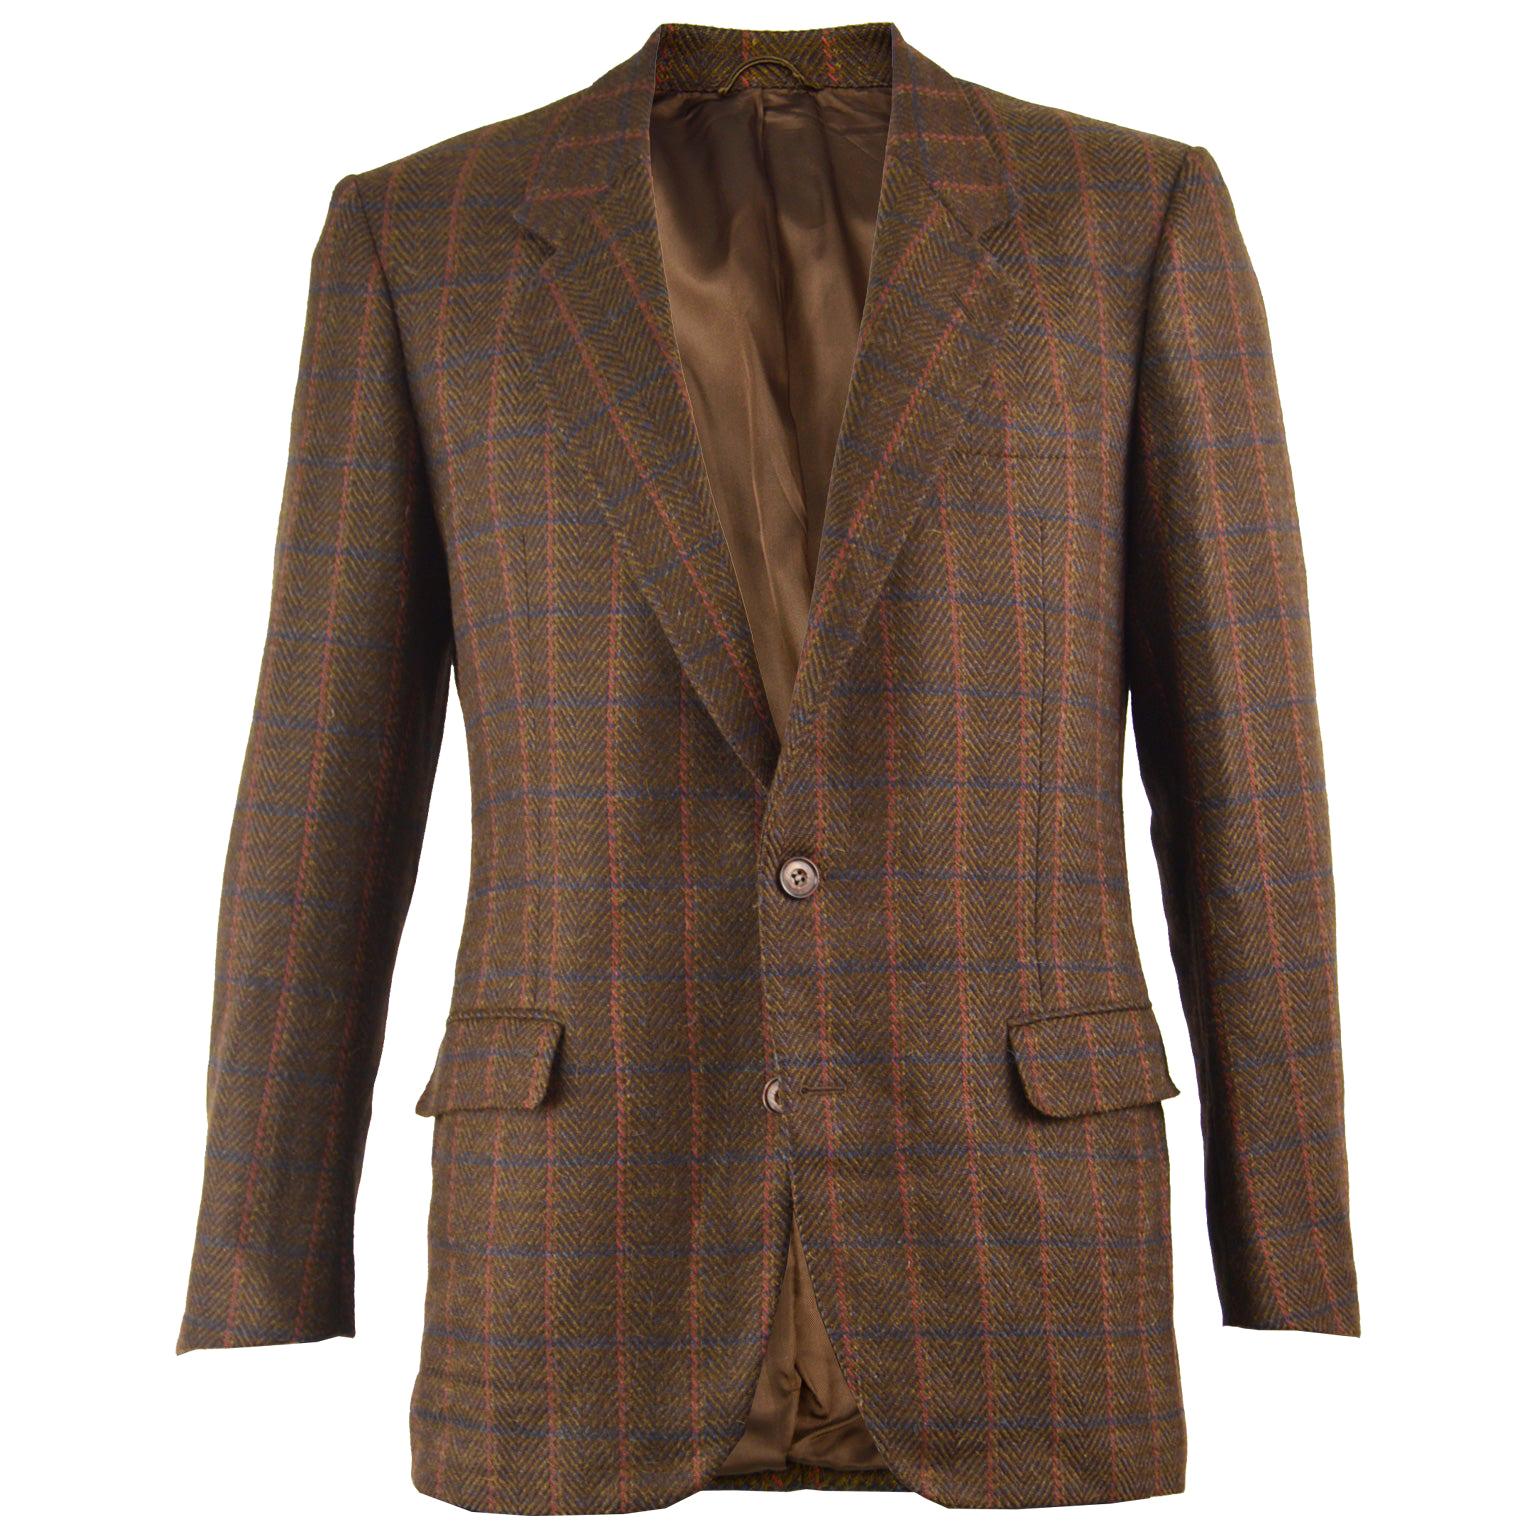 Yves Saint Laurent Rive Gauche Men's Brown Checked Wool and Mohair Jacket  1970s